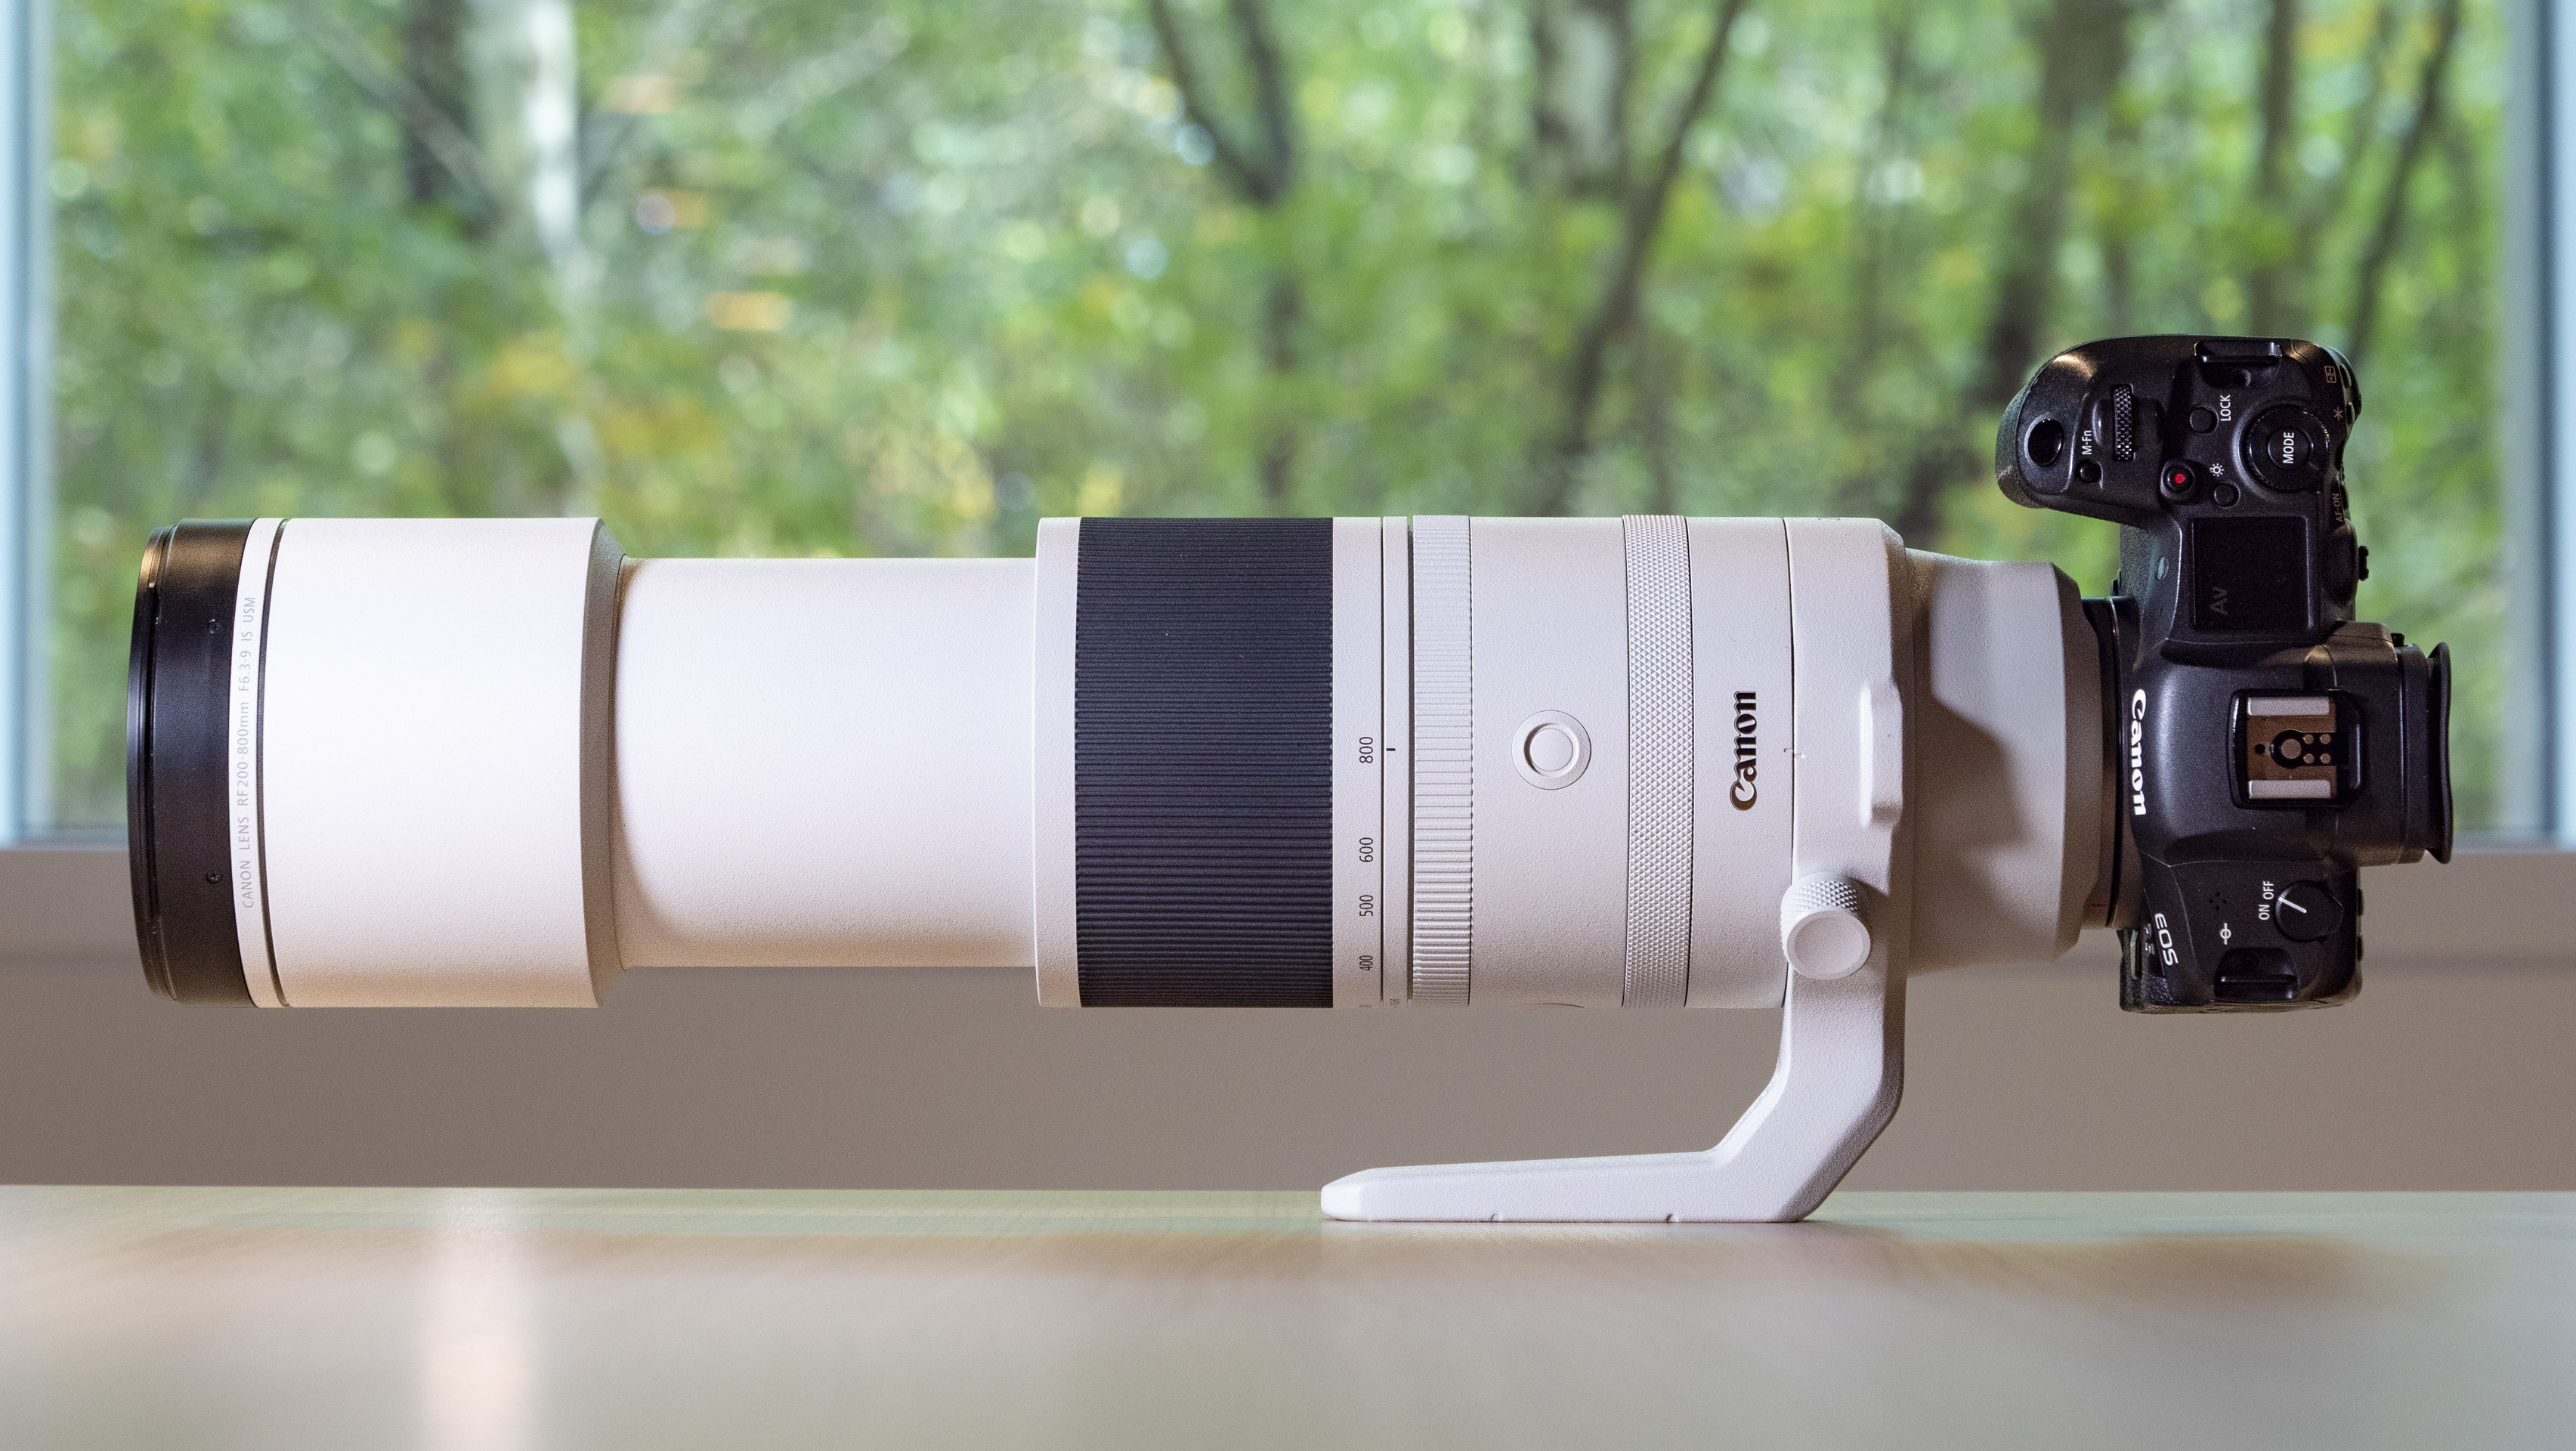 Review of the Canon RF 200-800mm f/6.3-9 IS USM